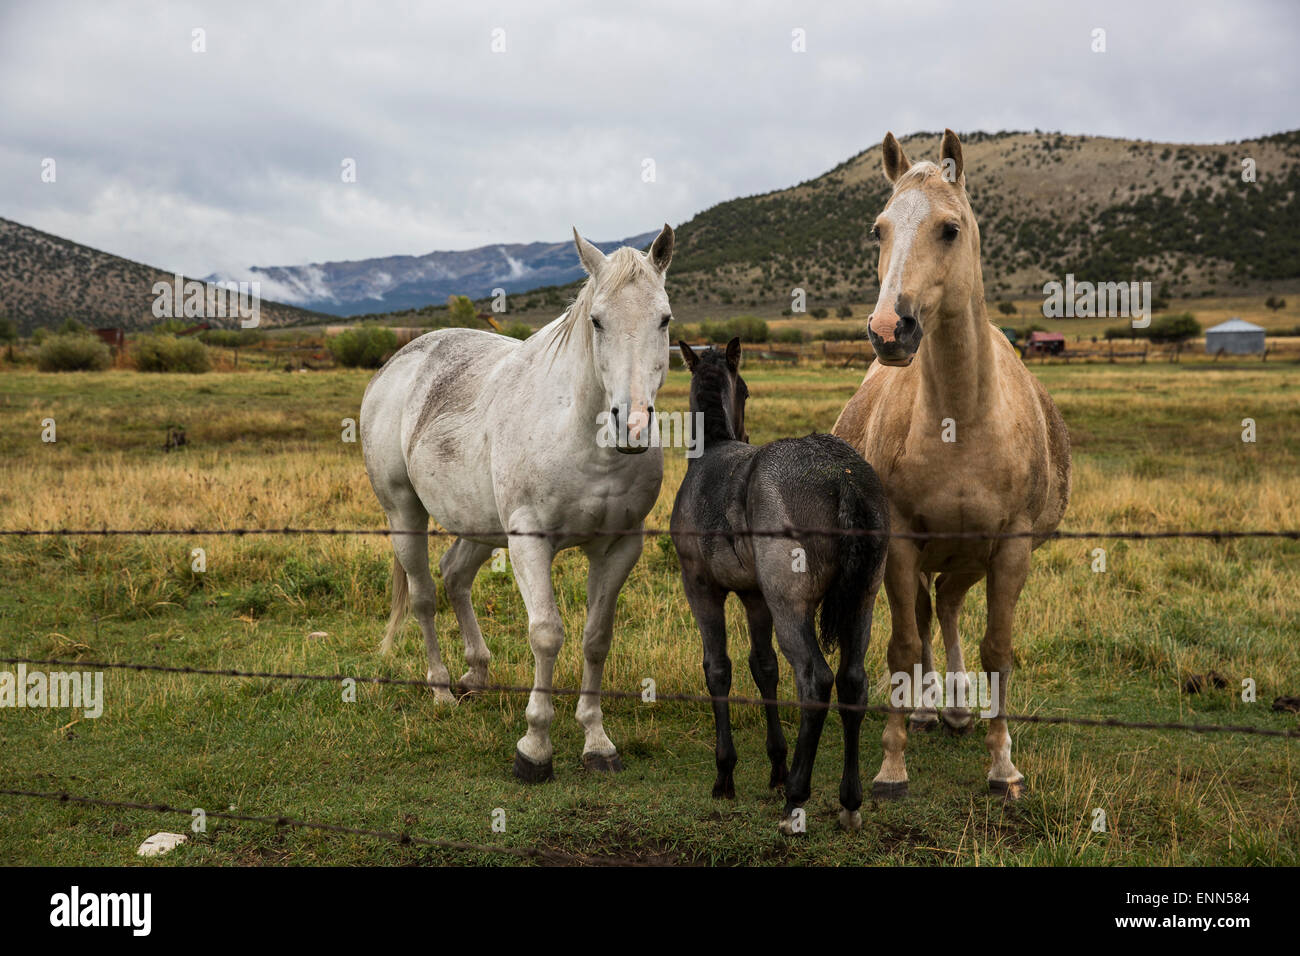 Three horses stand together in Idaho Stock Photo